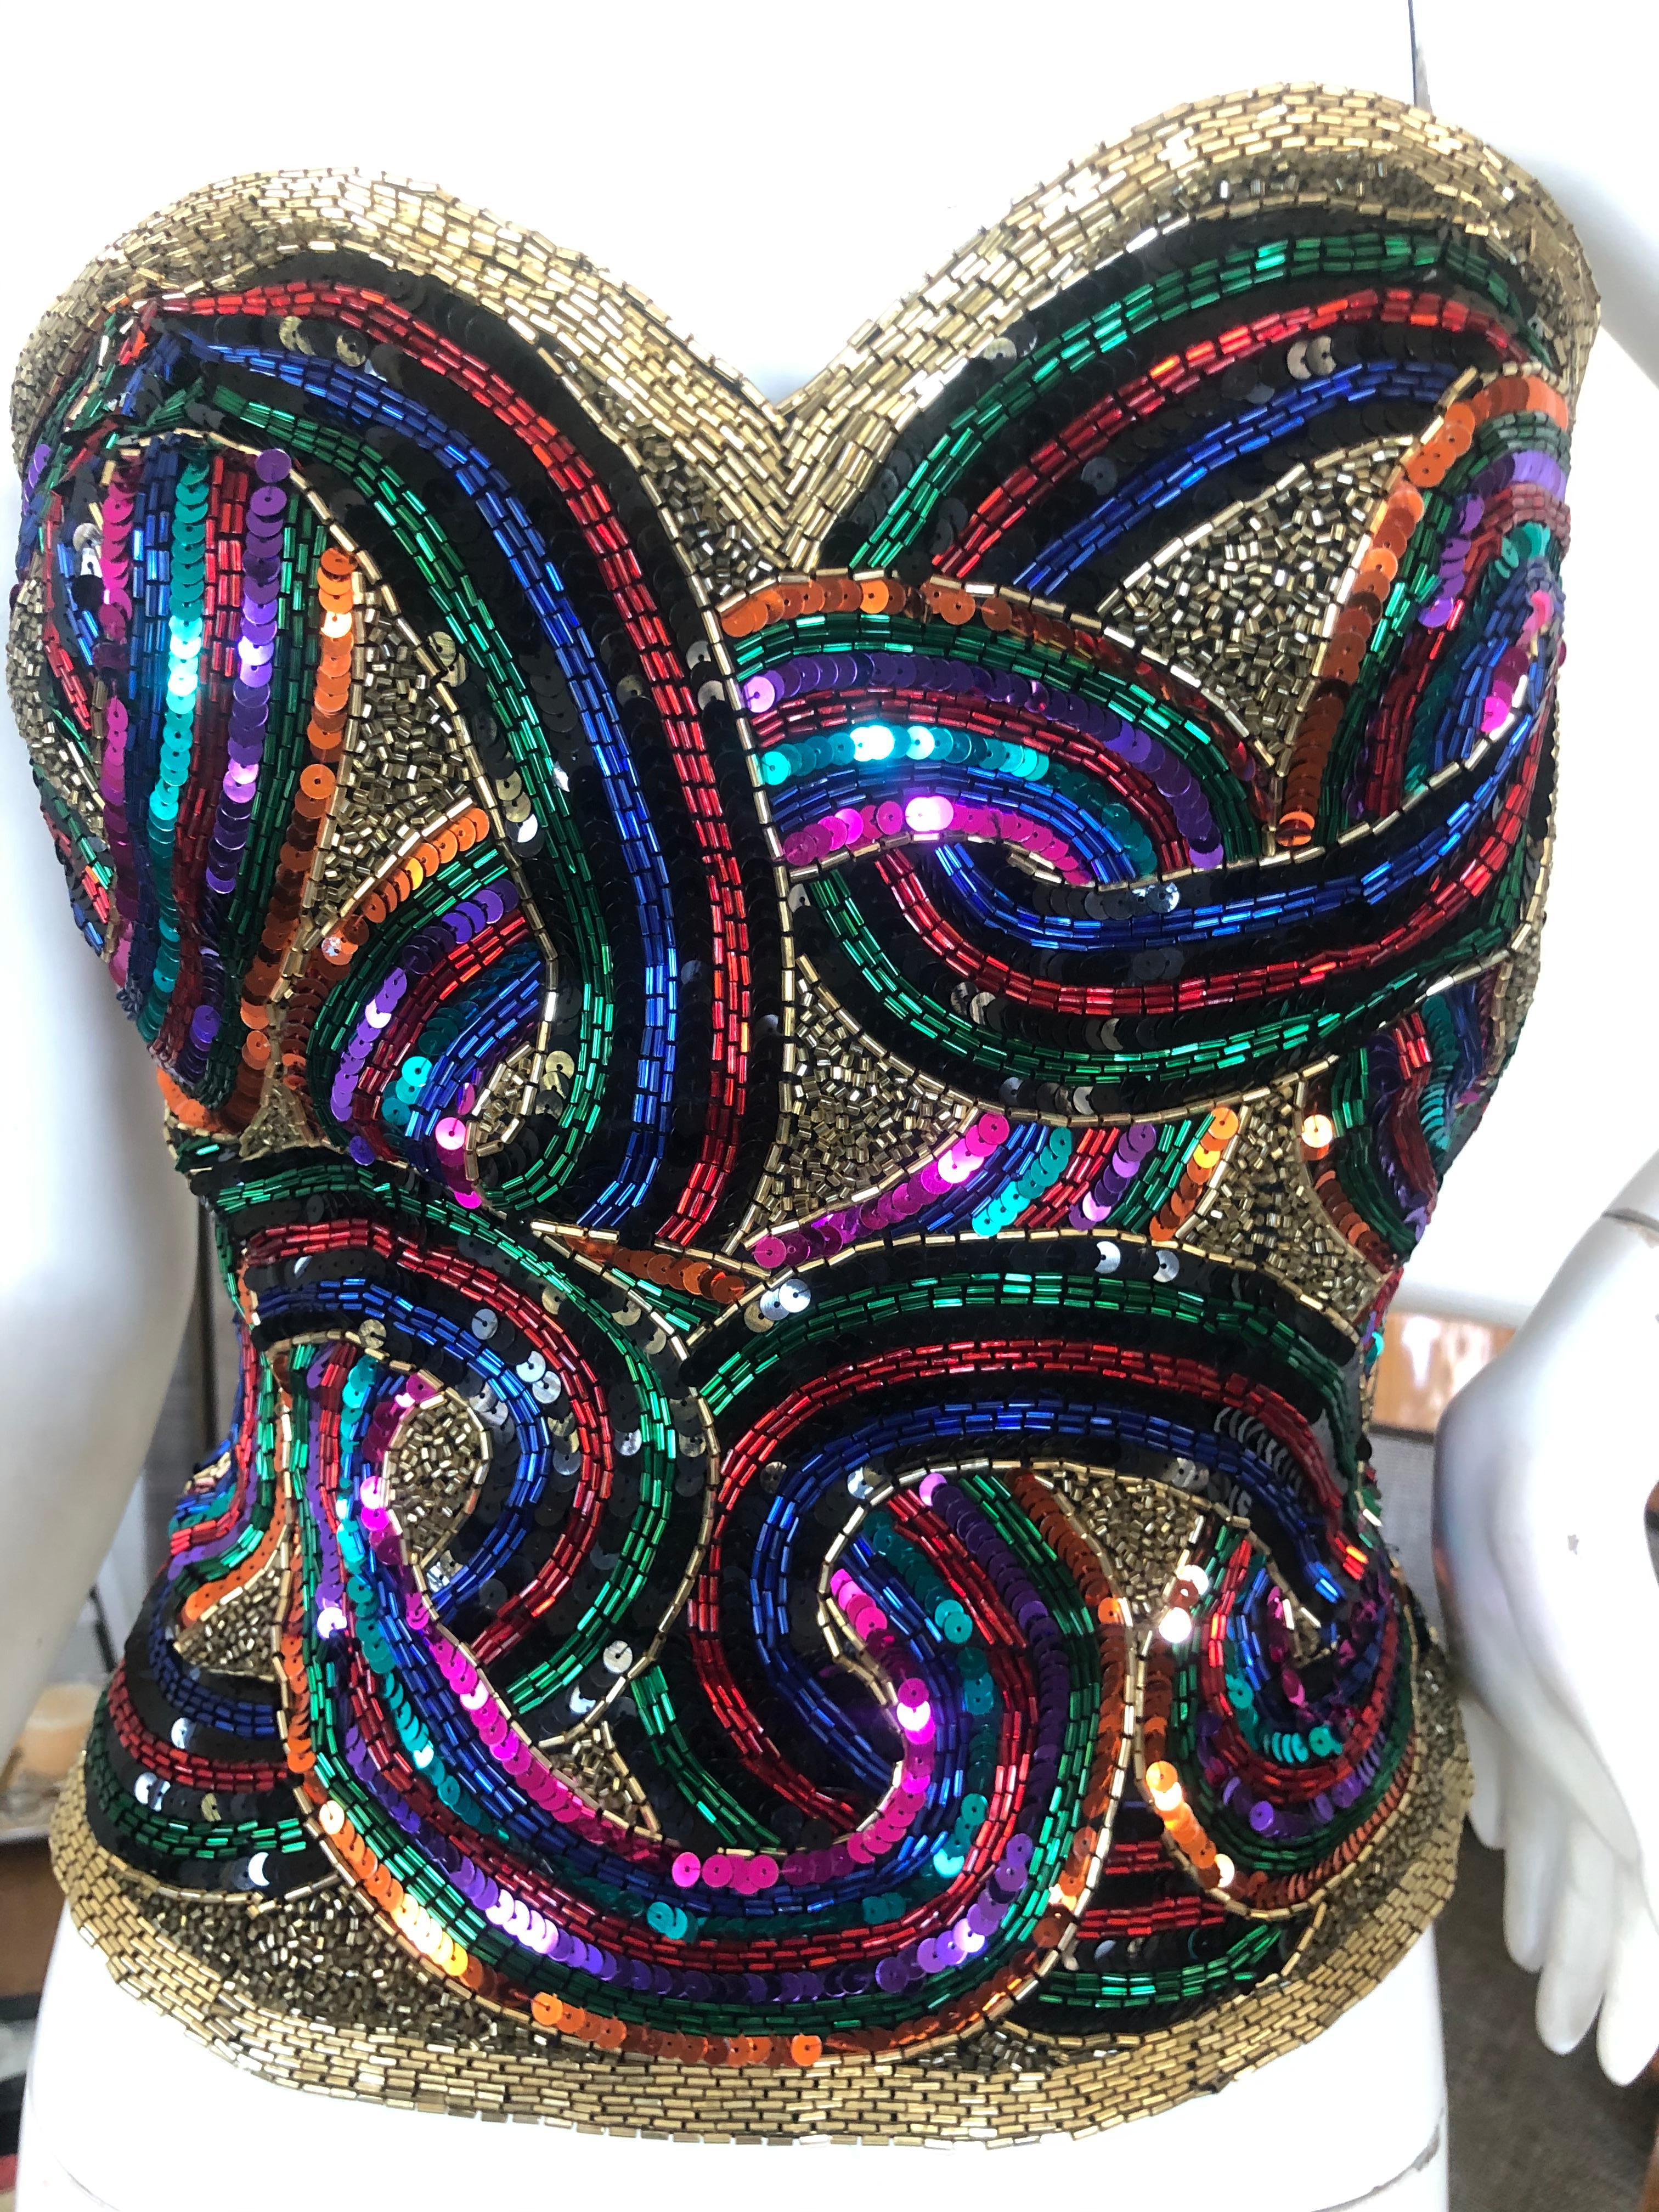 Oleg Cassini Seventies Disco Era Beaded & Sequined Corset Bustier
DIsco era divine, so much prettier in person.
Made of bugle beads and sequins that give so much movement, so fun.
Size M
Bust 32